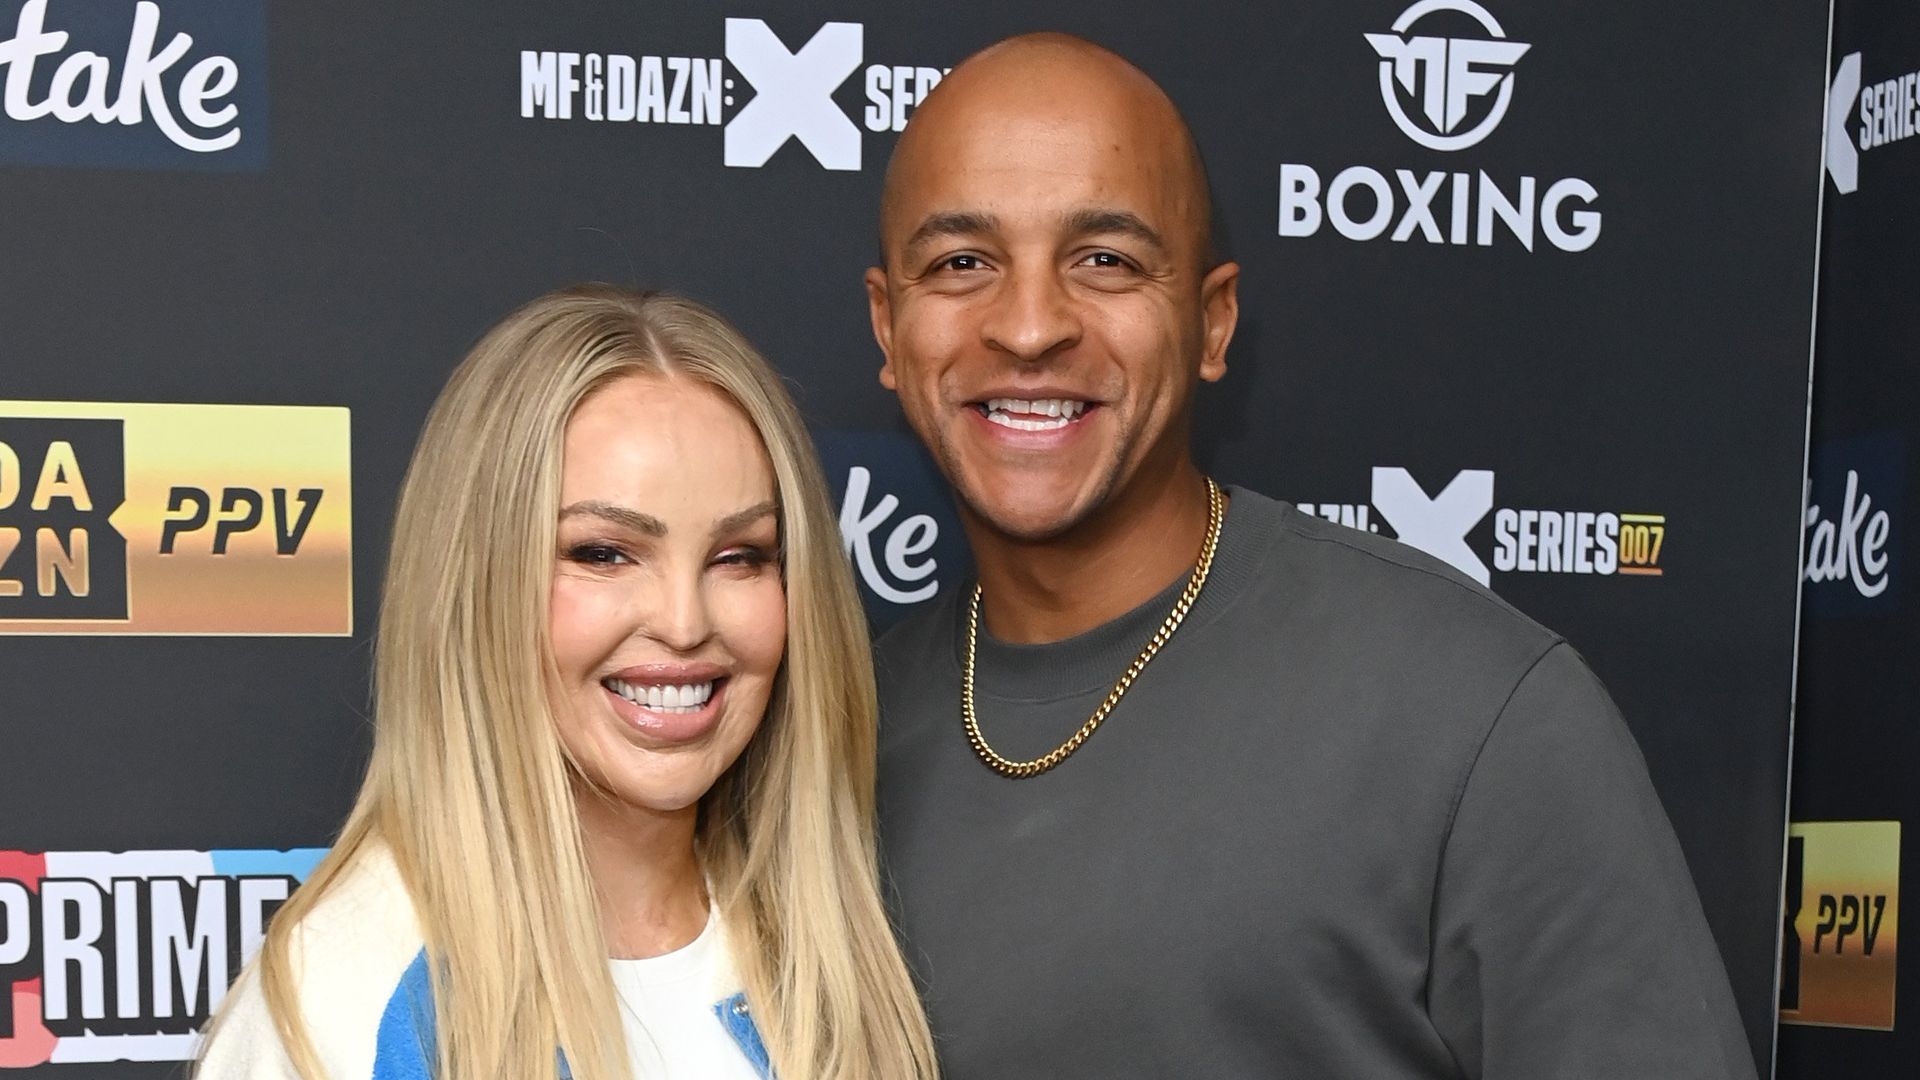 Katie Piper in white and blue jacket with Richard Sutton in a grey jumper